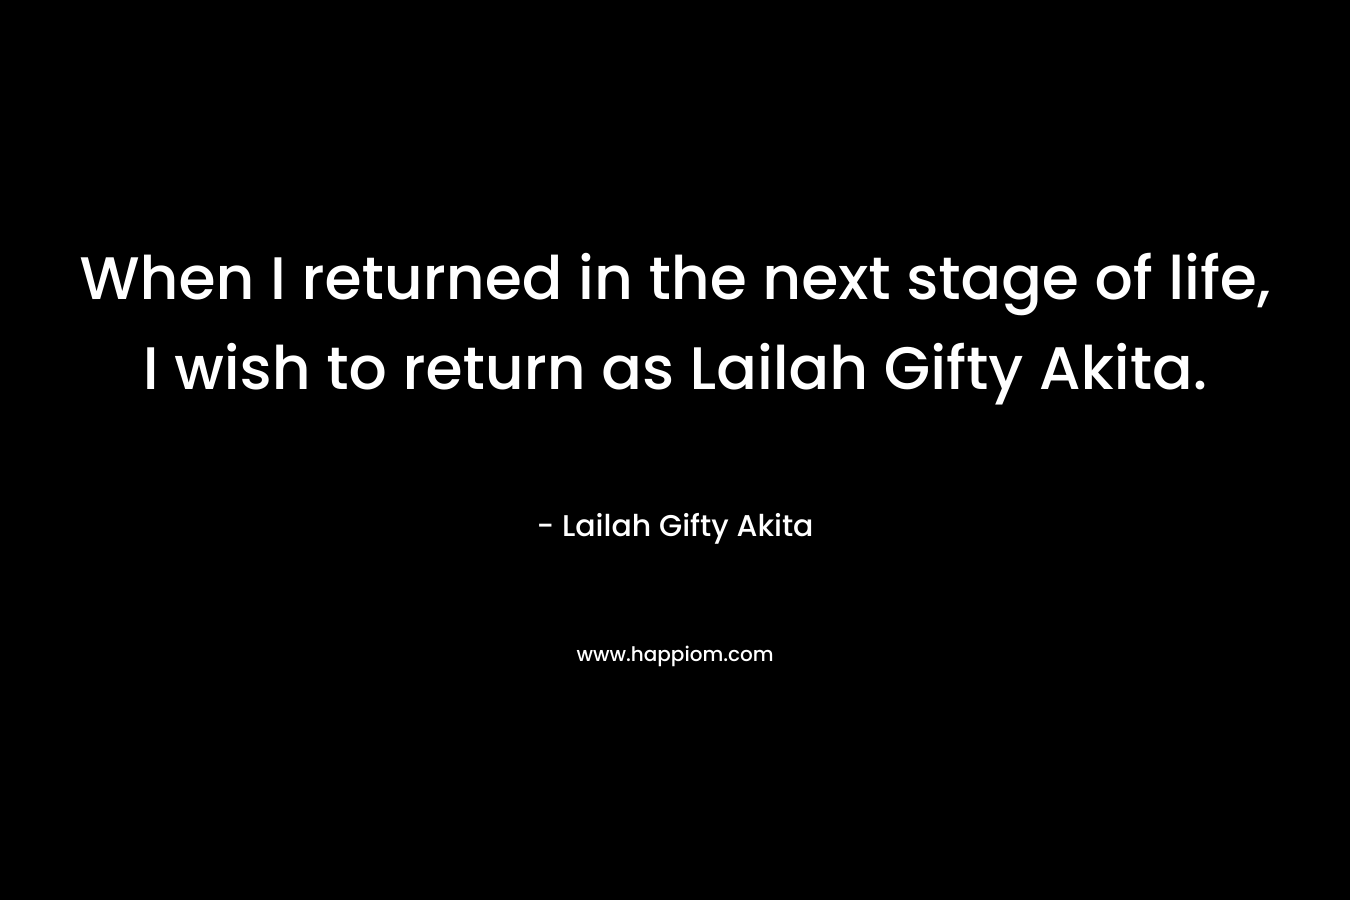 When I returned in the next stage of life, I wish to return as Lailah Gifty Akita. – Lailah Gifty Akita